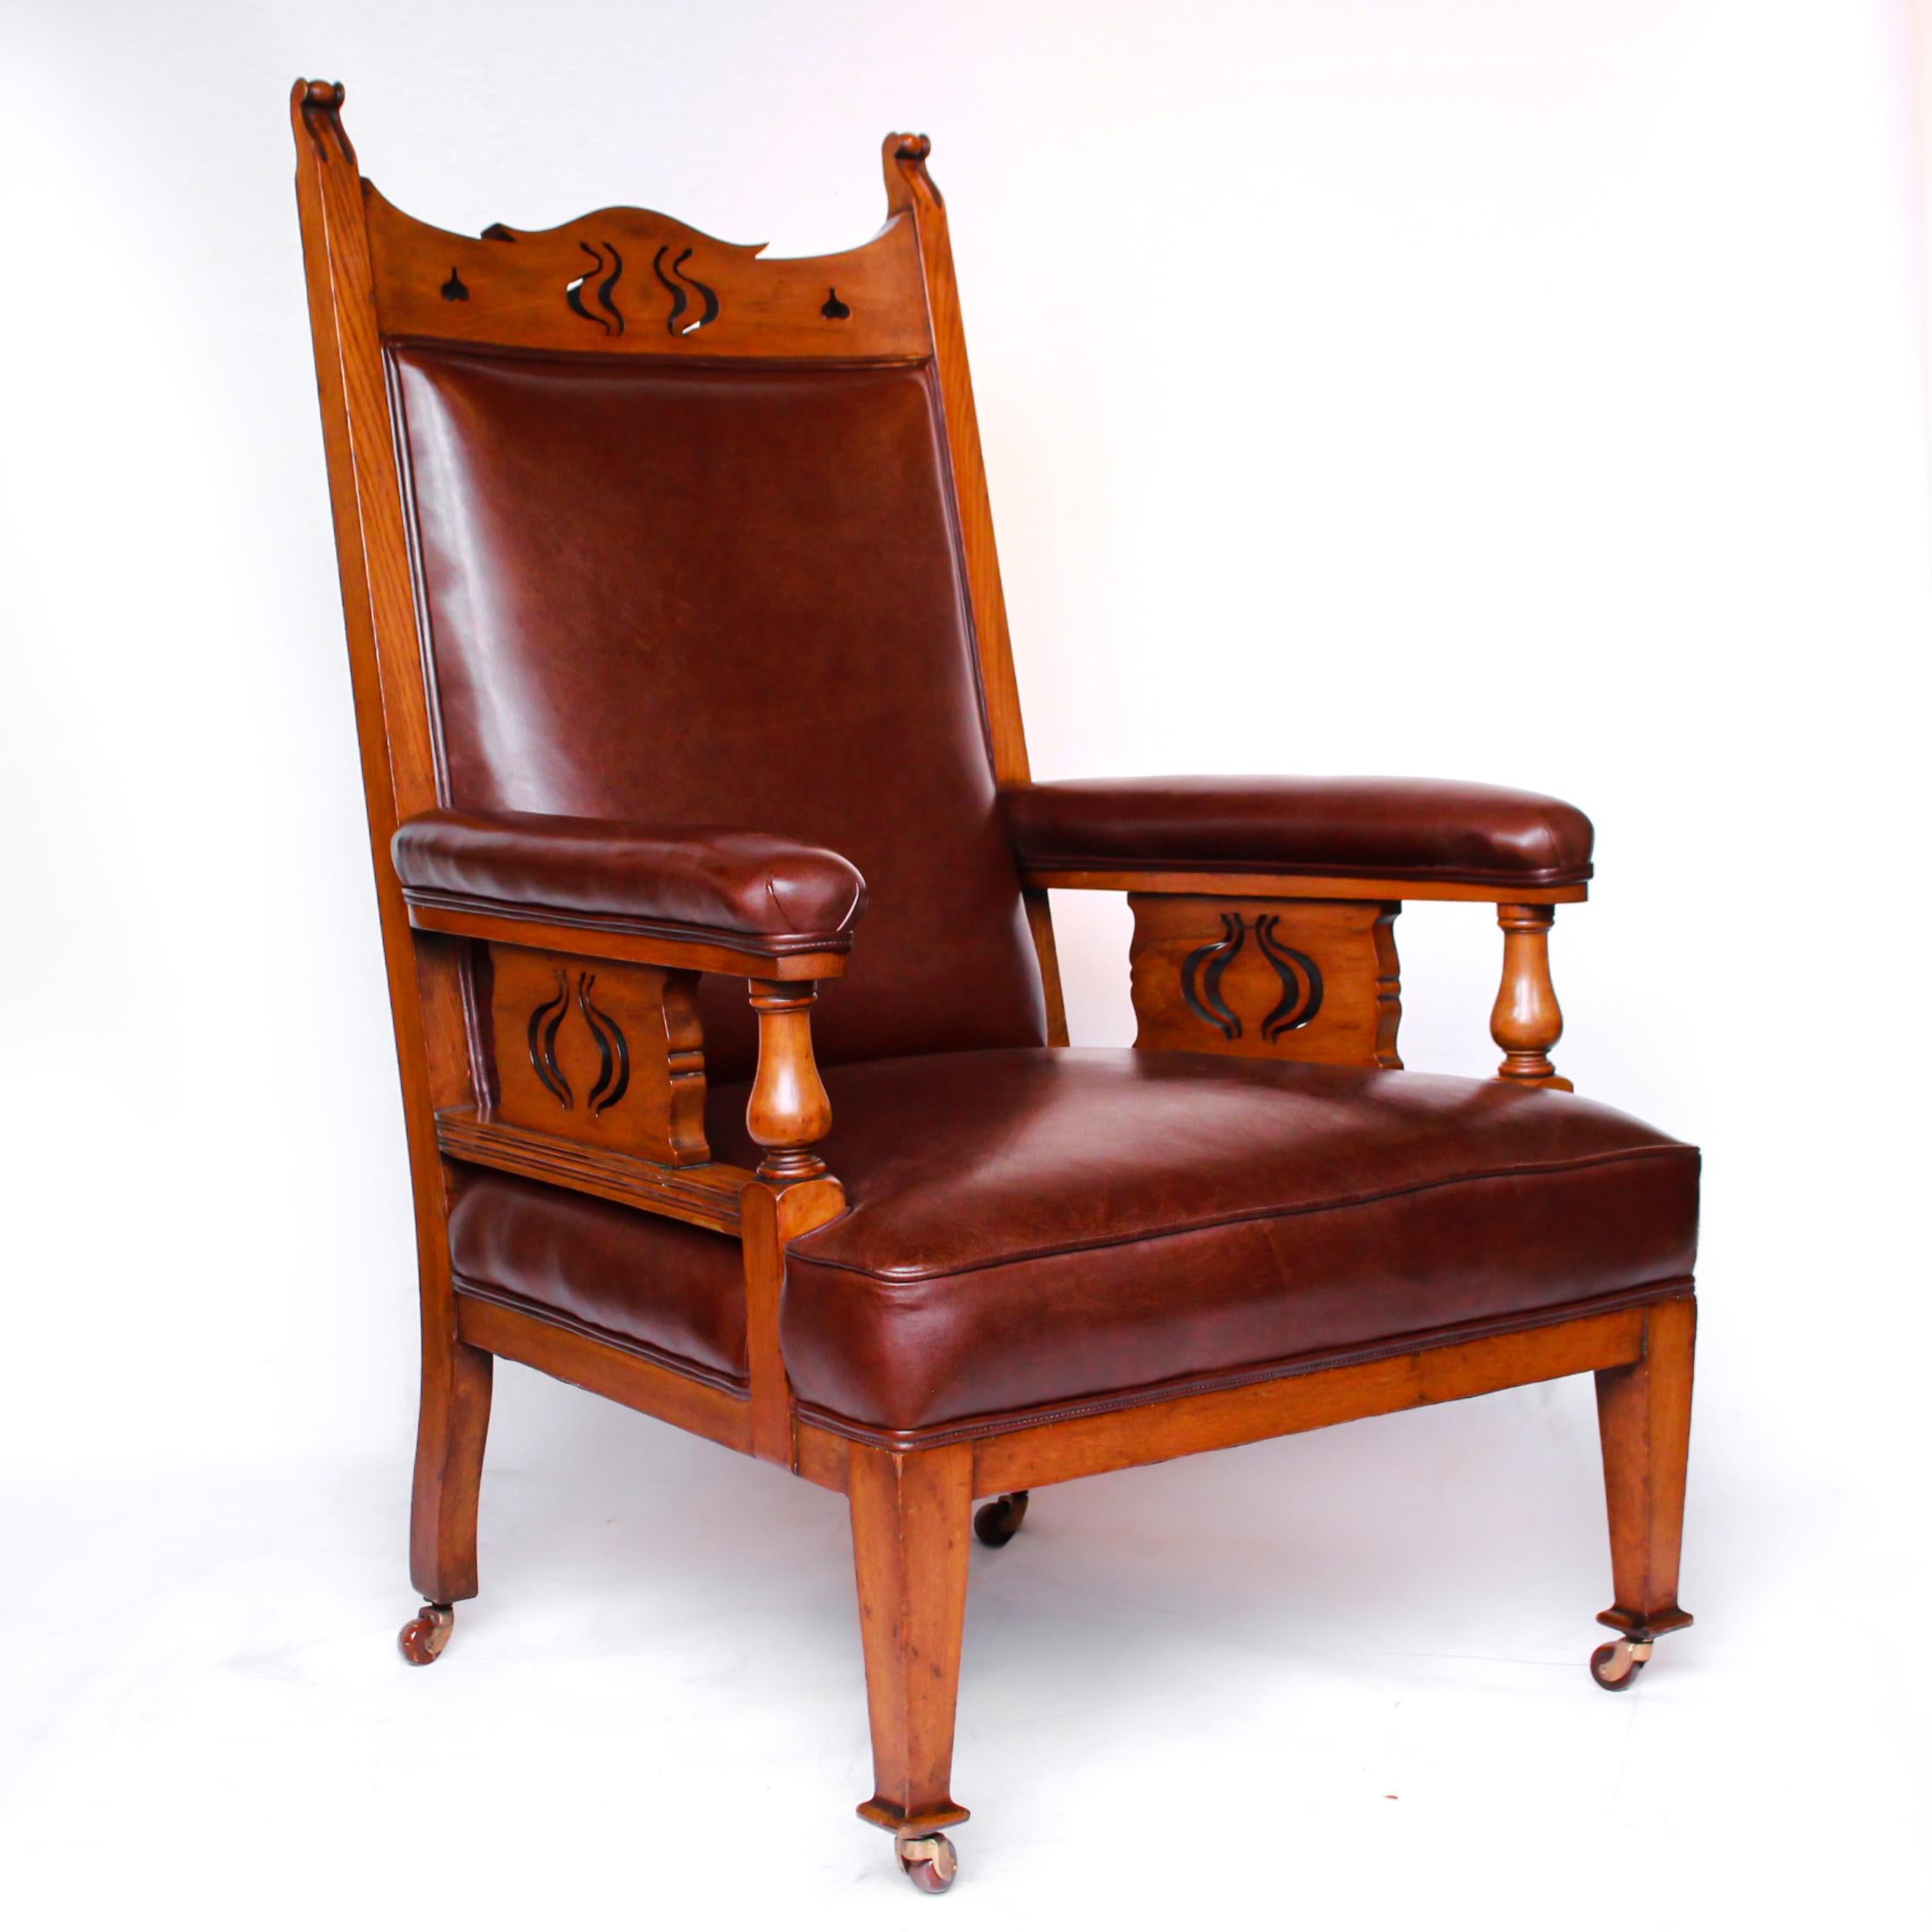 English Pair of Arts & Craft's Library Chairs Solid Oak Upholstery in Chestnut Leather